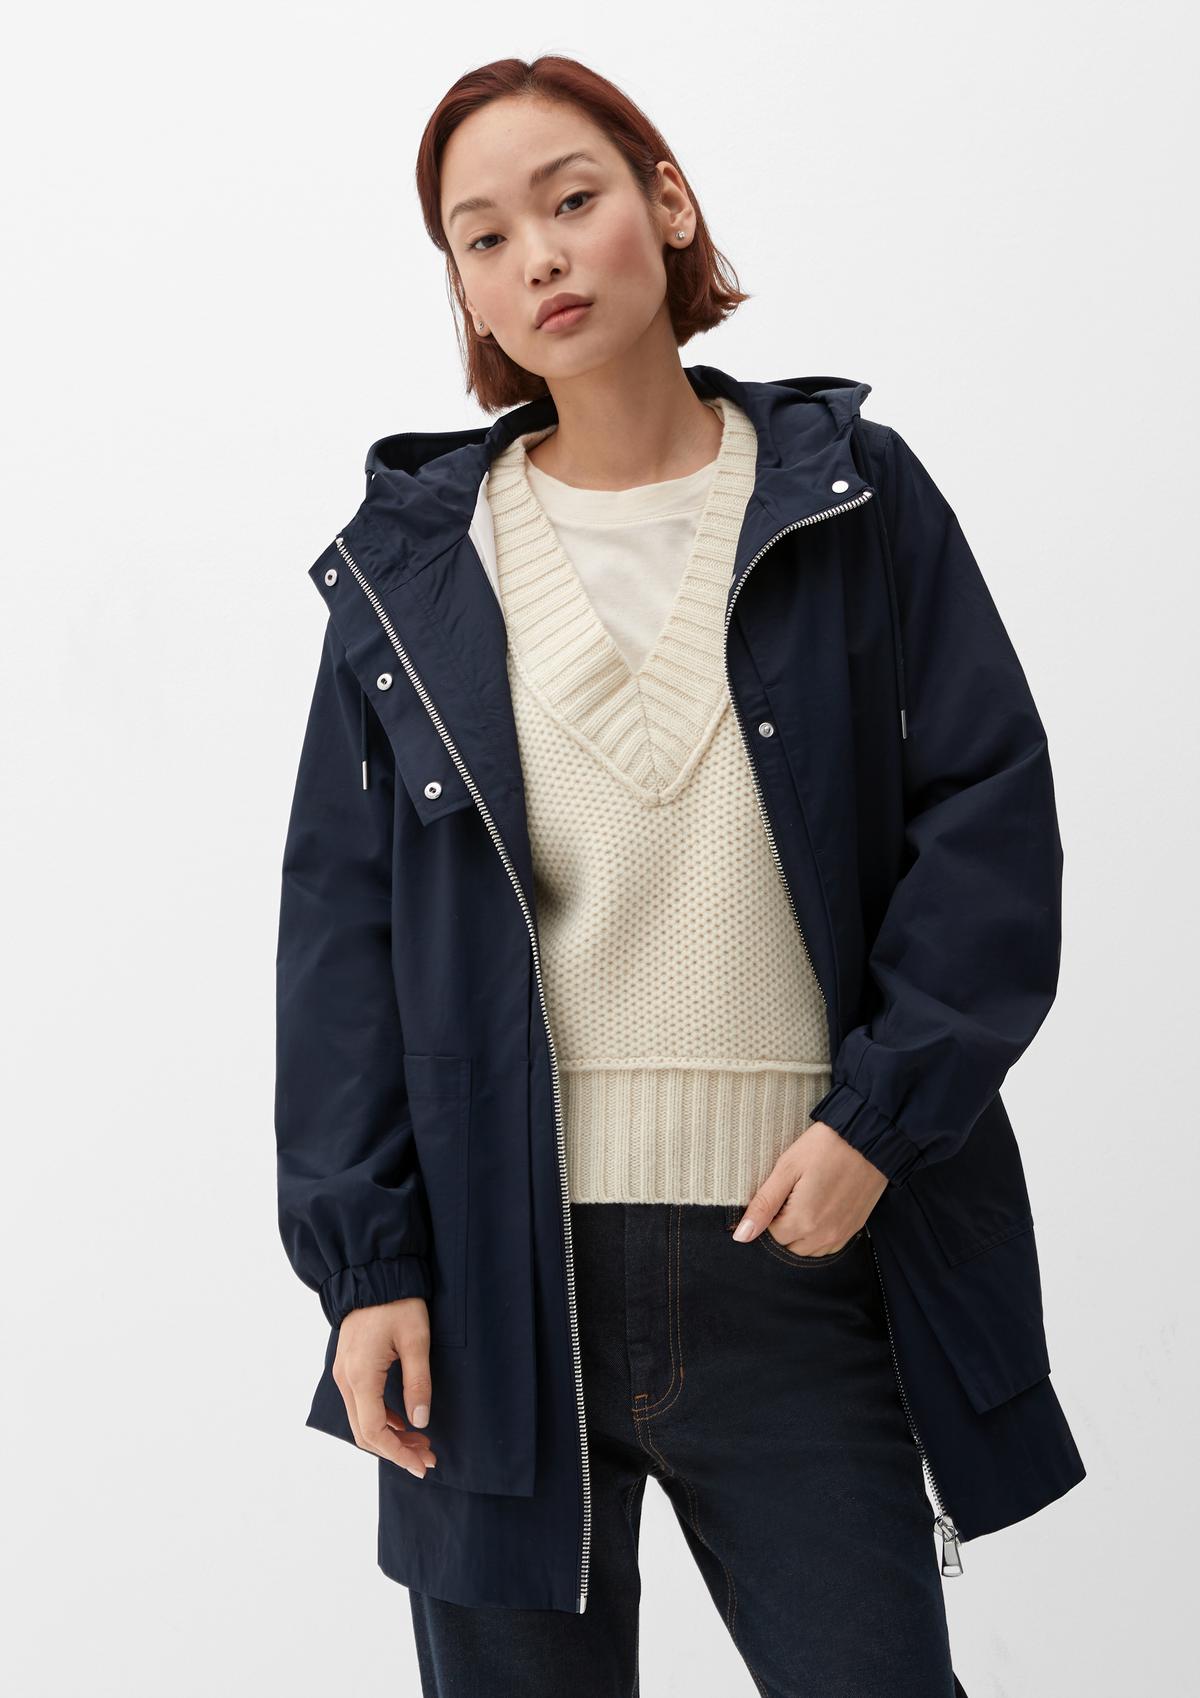 Outdoor jacket in a layered look